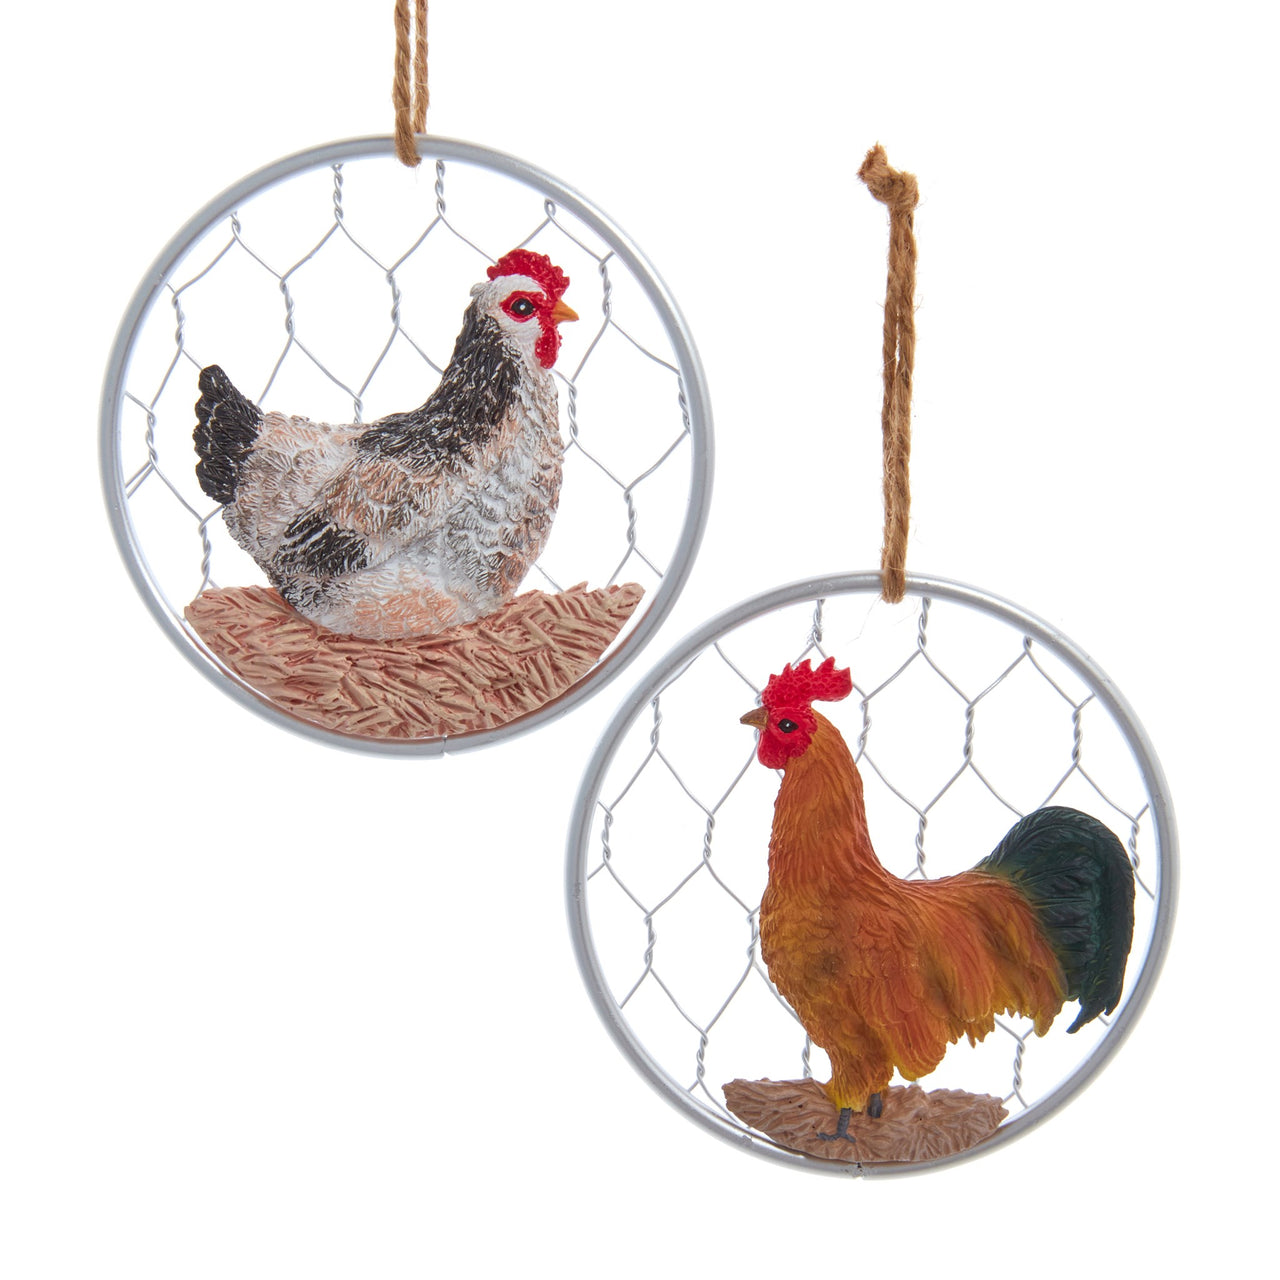 3.5"RESIN CHICKEN ON WIRE ORN 2/A